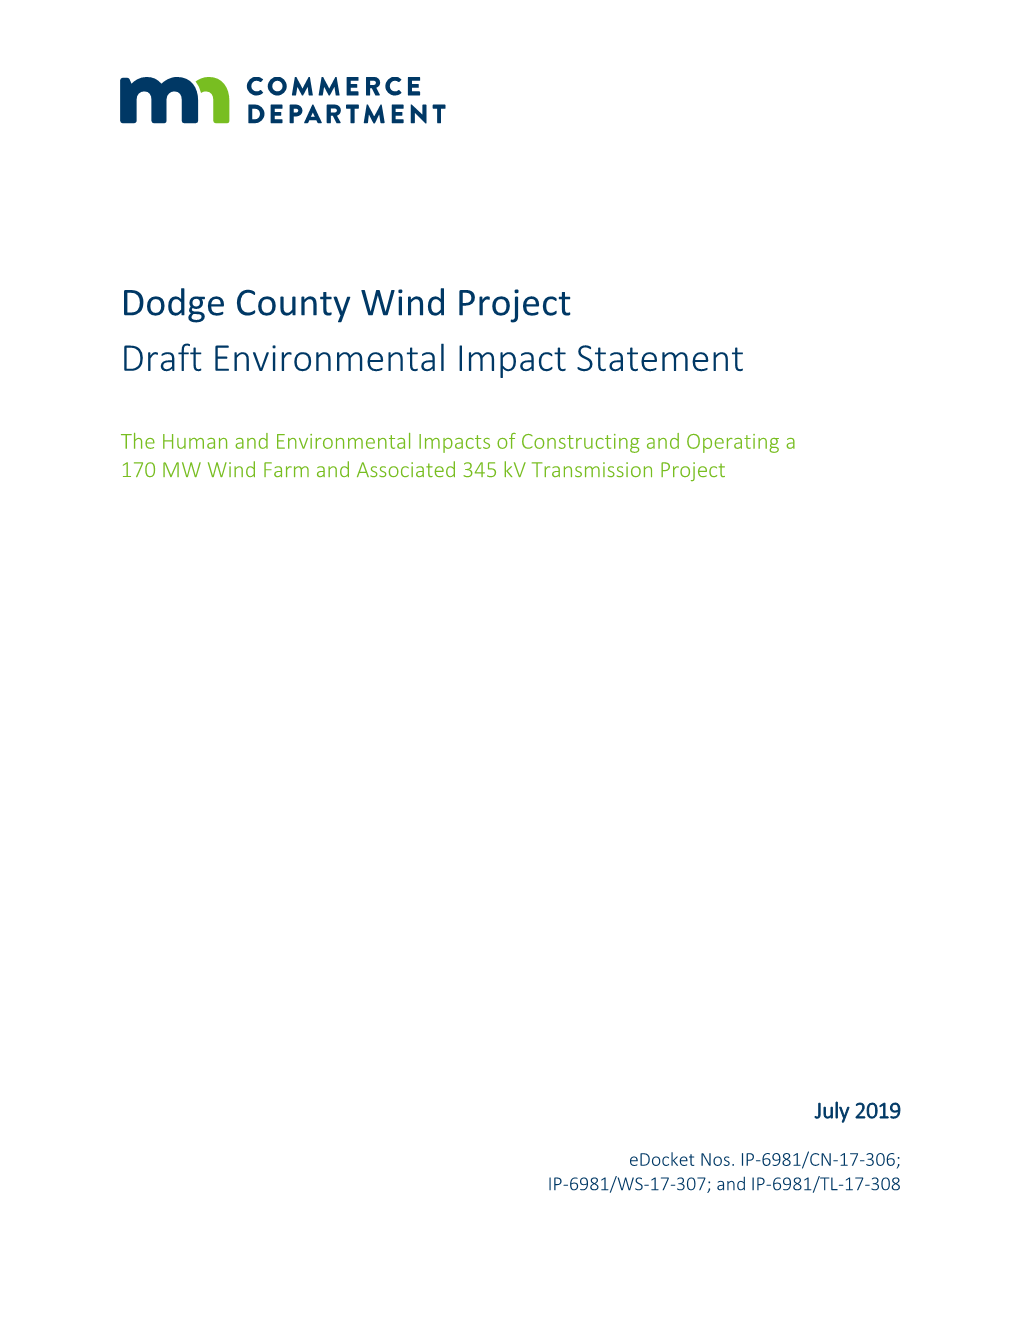 Dodge County Wind Project Draft Environmental Impact Statement